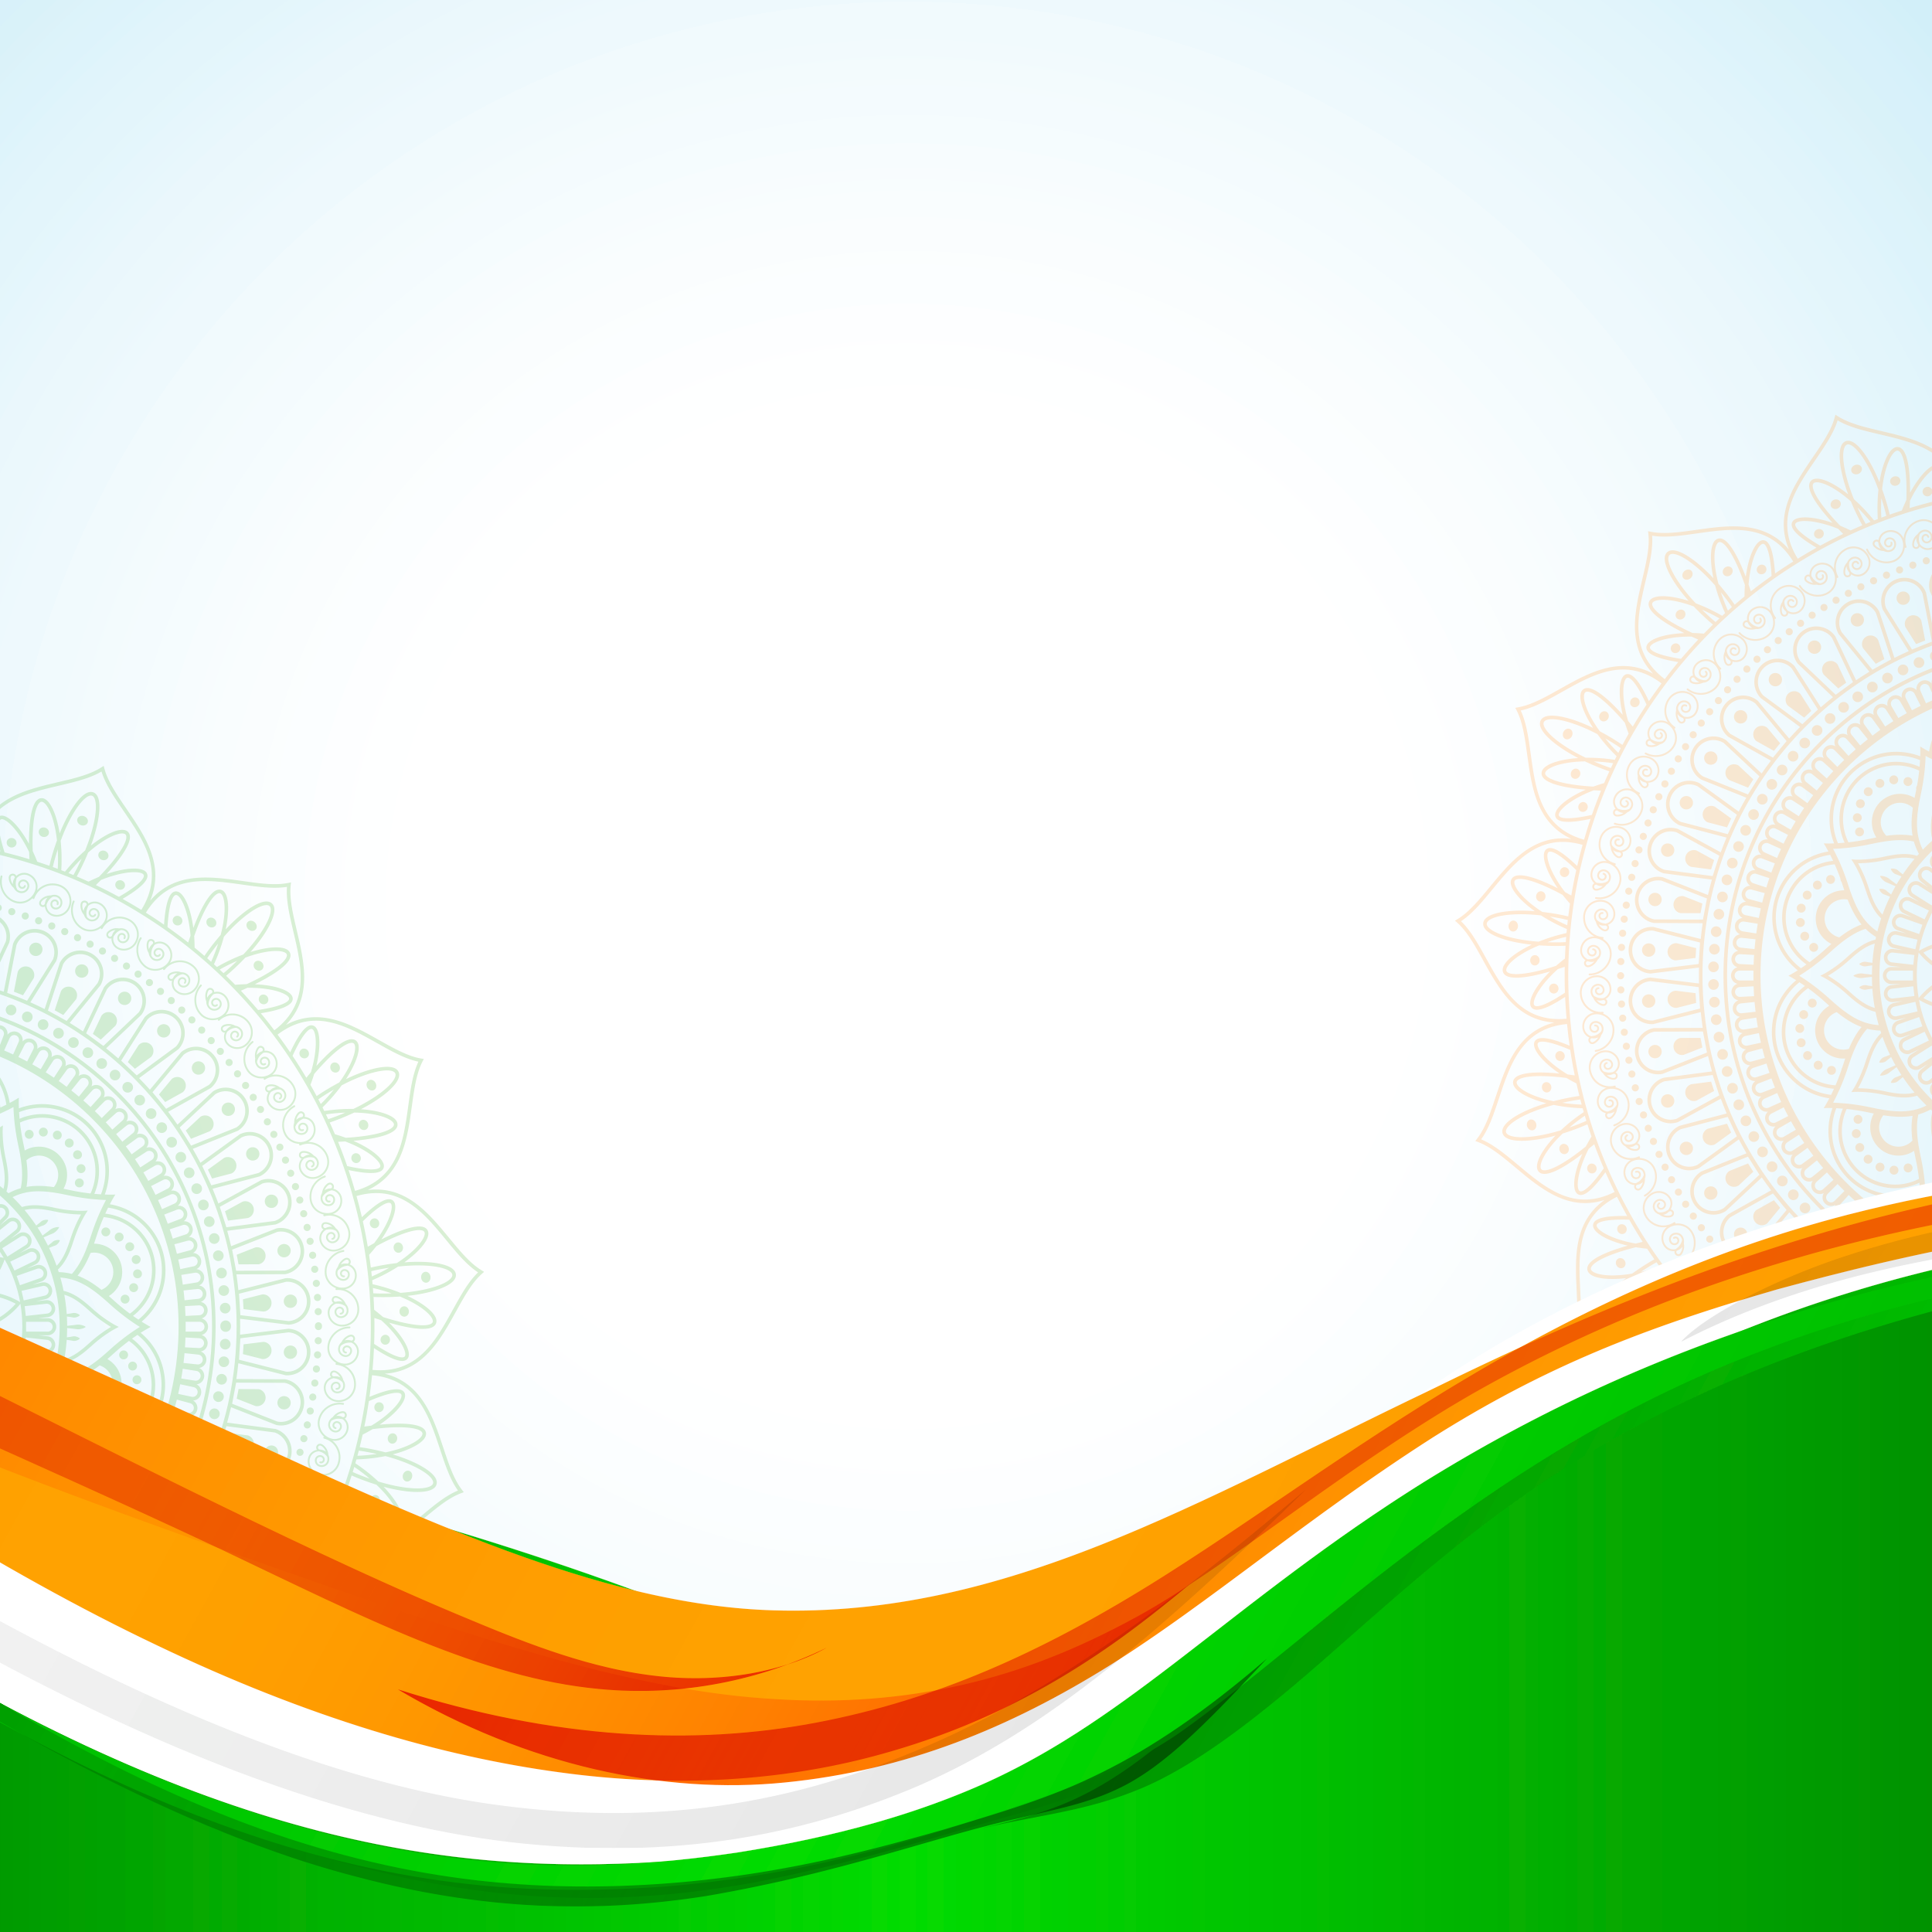 Republic Day Poster Background | Republic Day Free Background